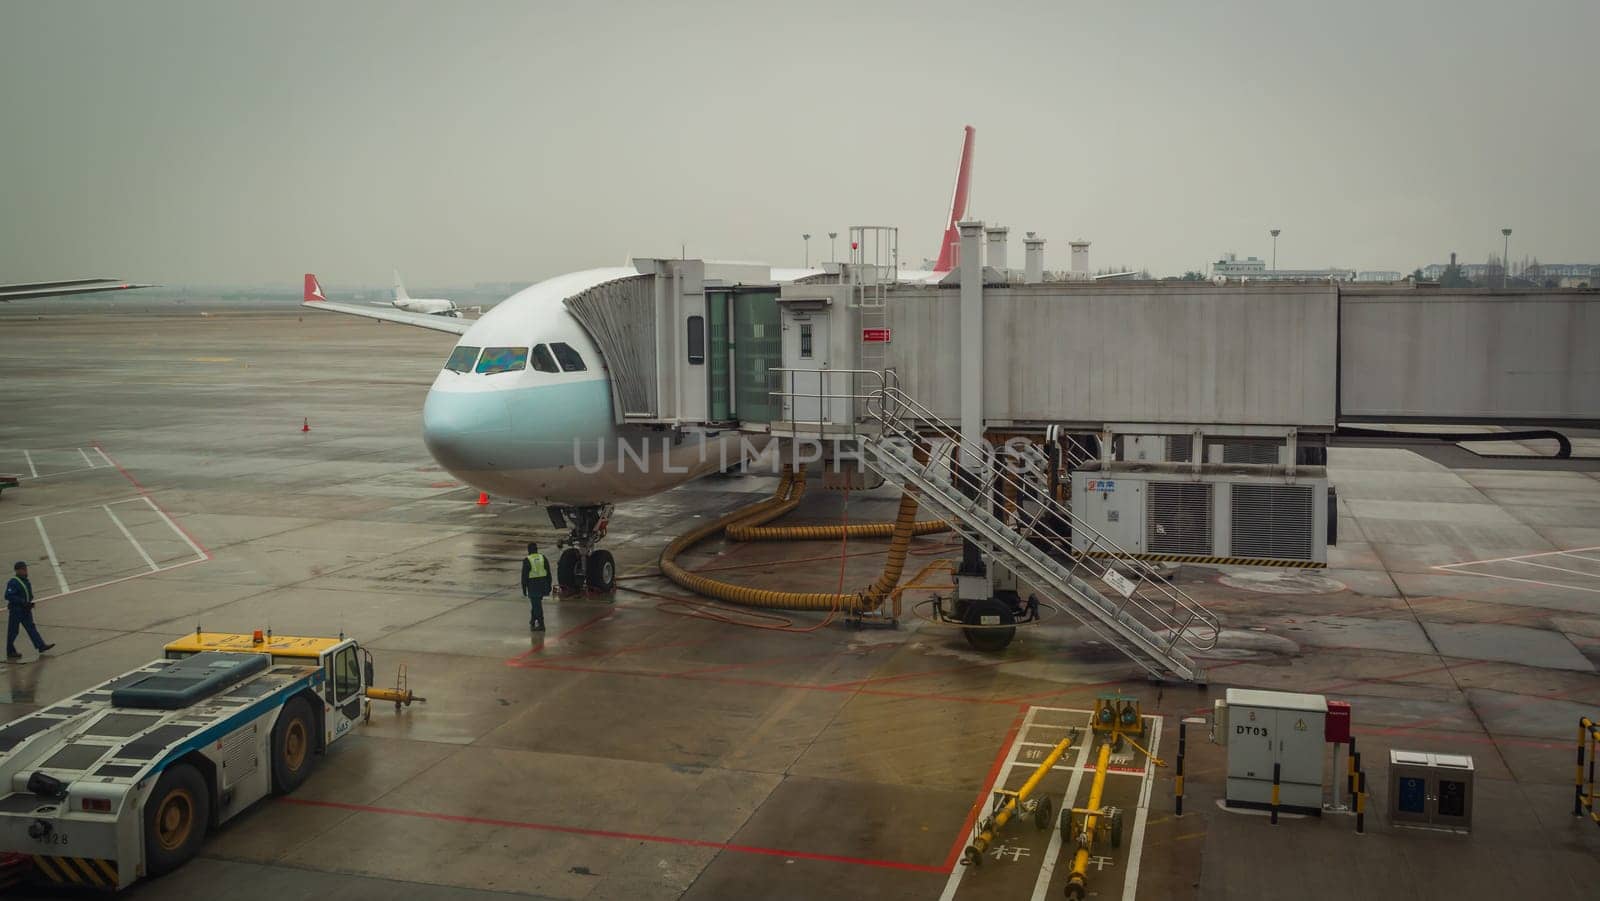 Airplane ready for boarding in Shanghai airport hub on rainy day